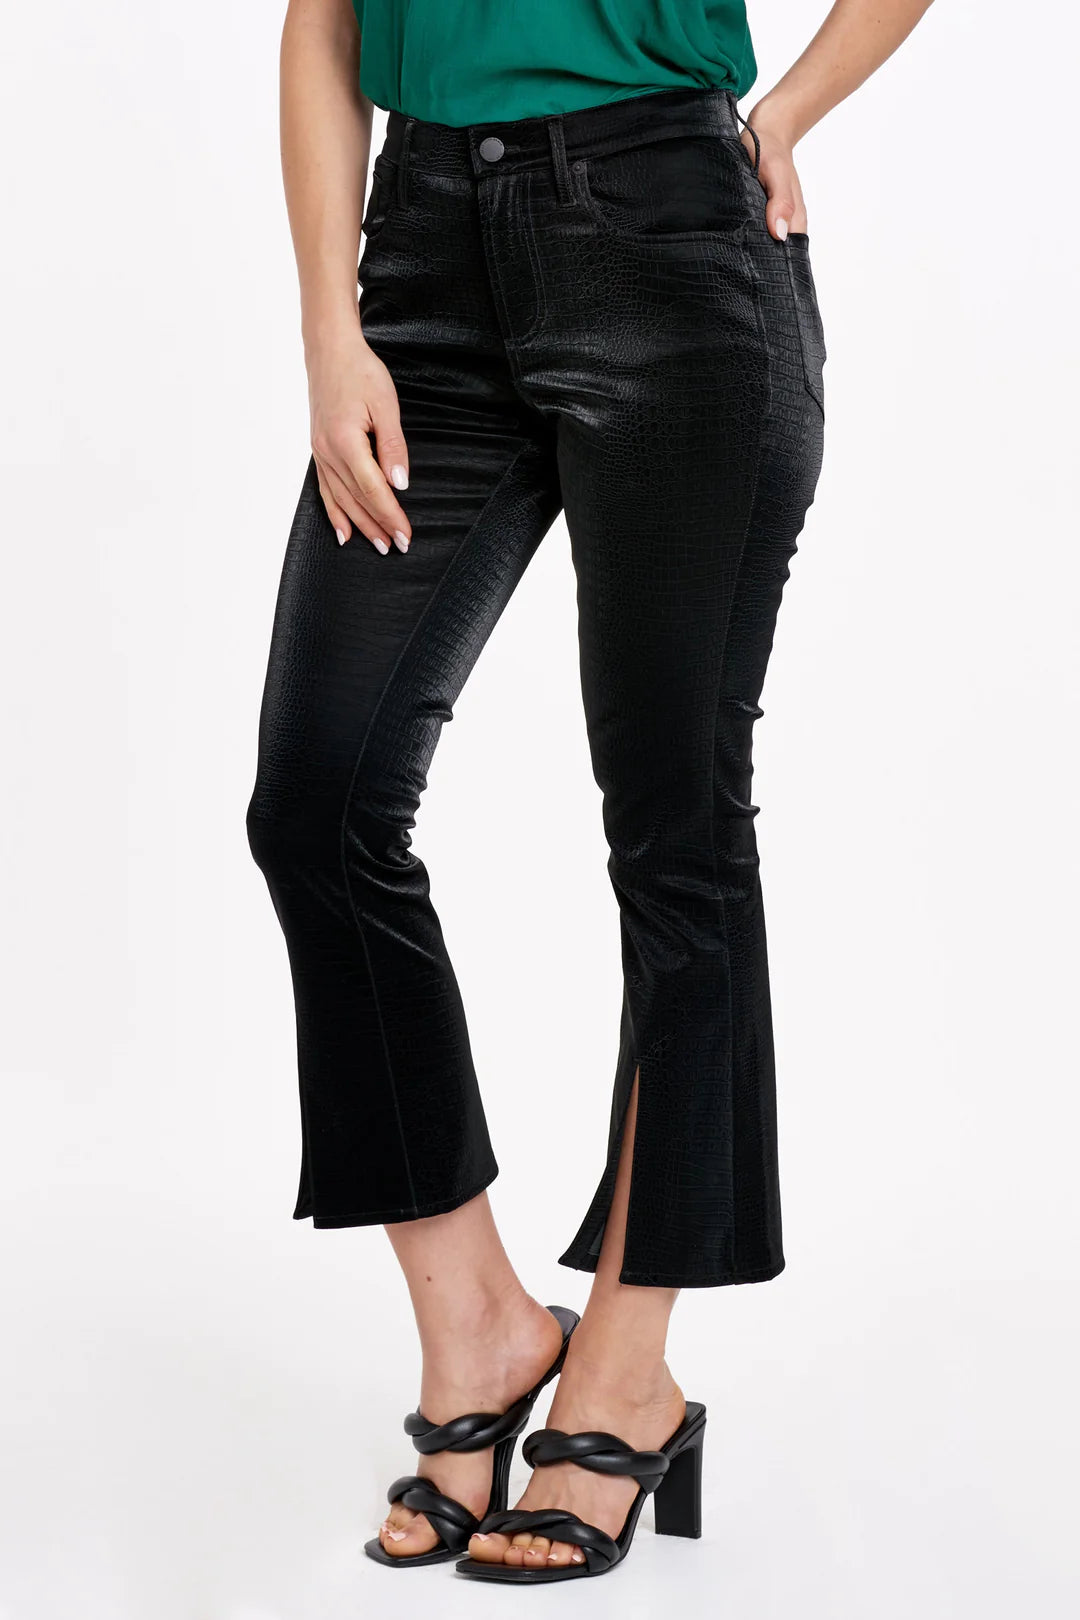 Super High Waisted Cropped Pants Black